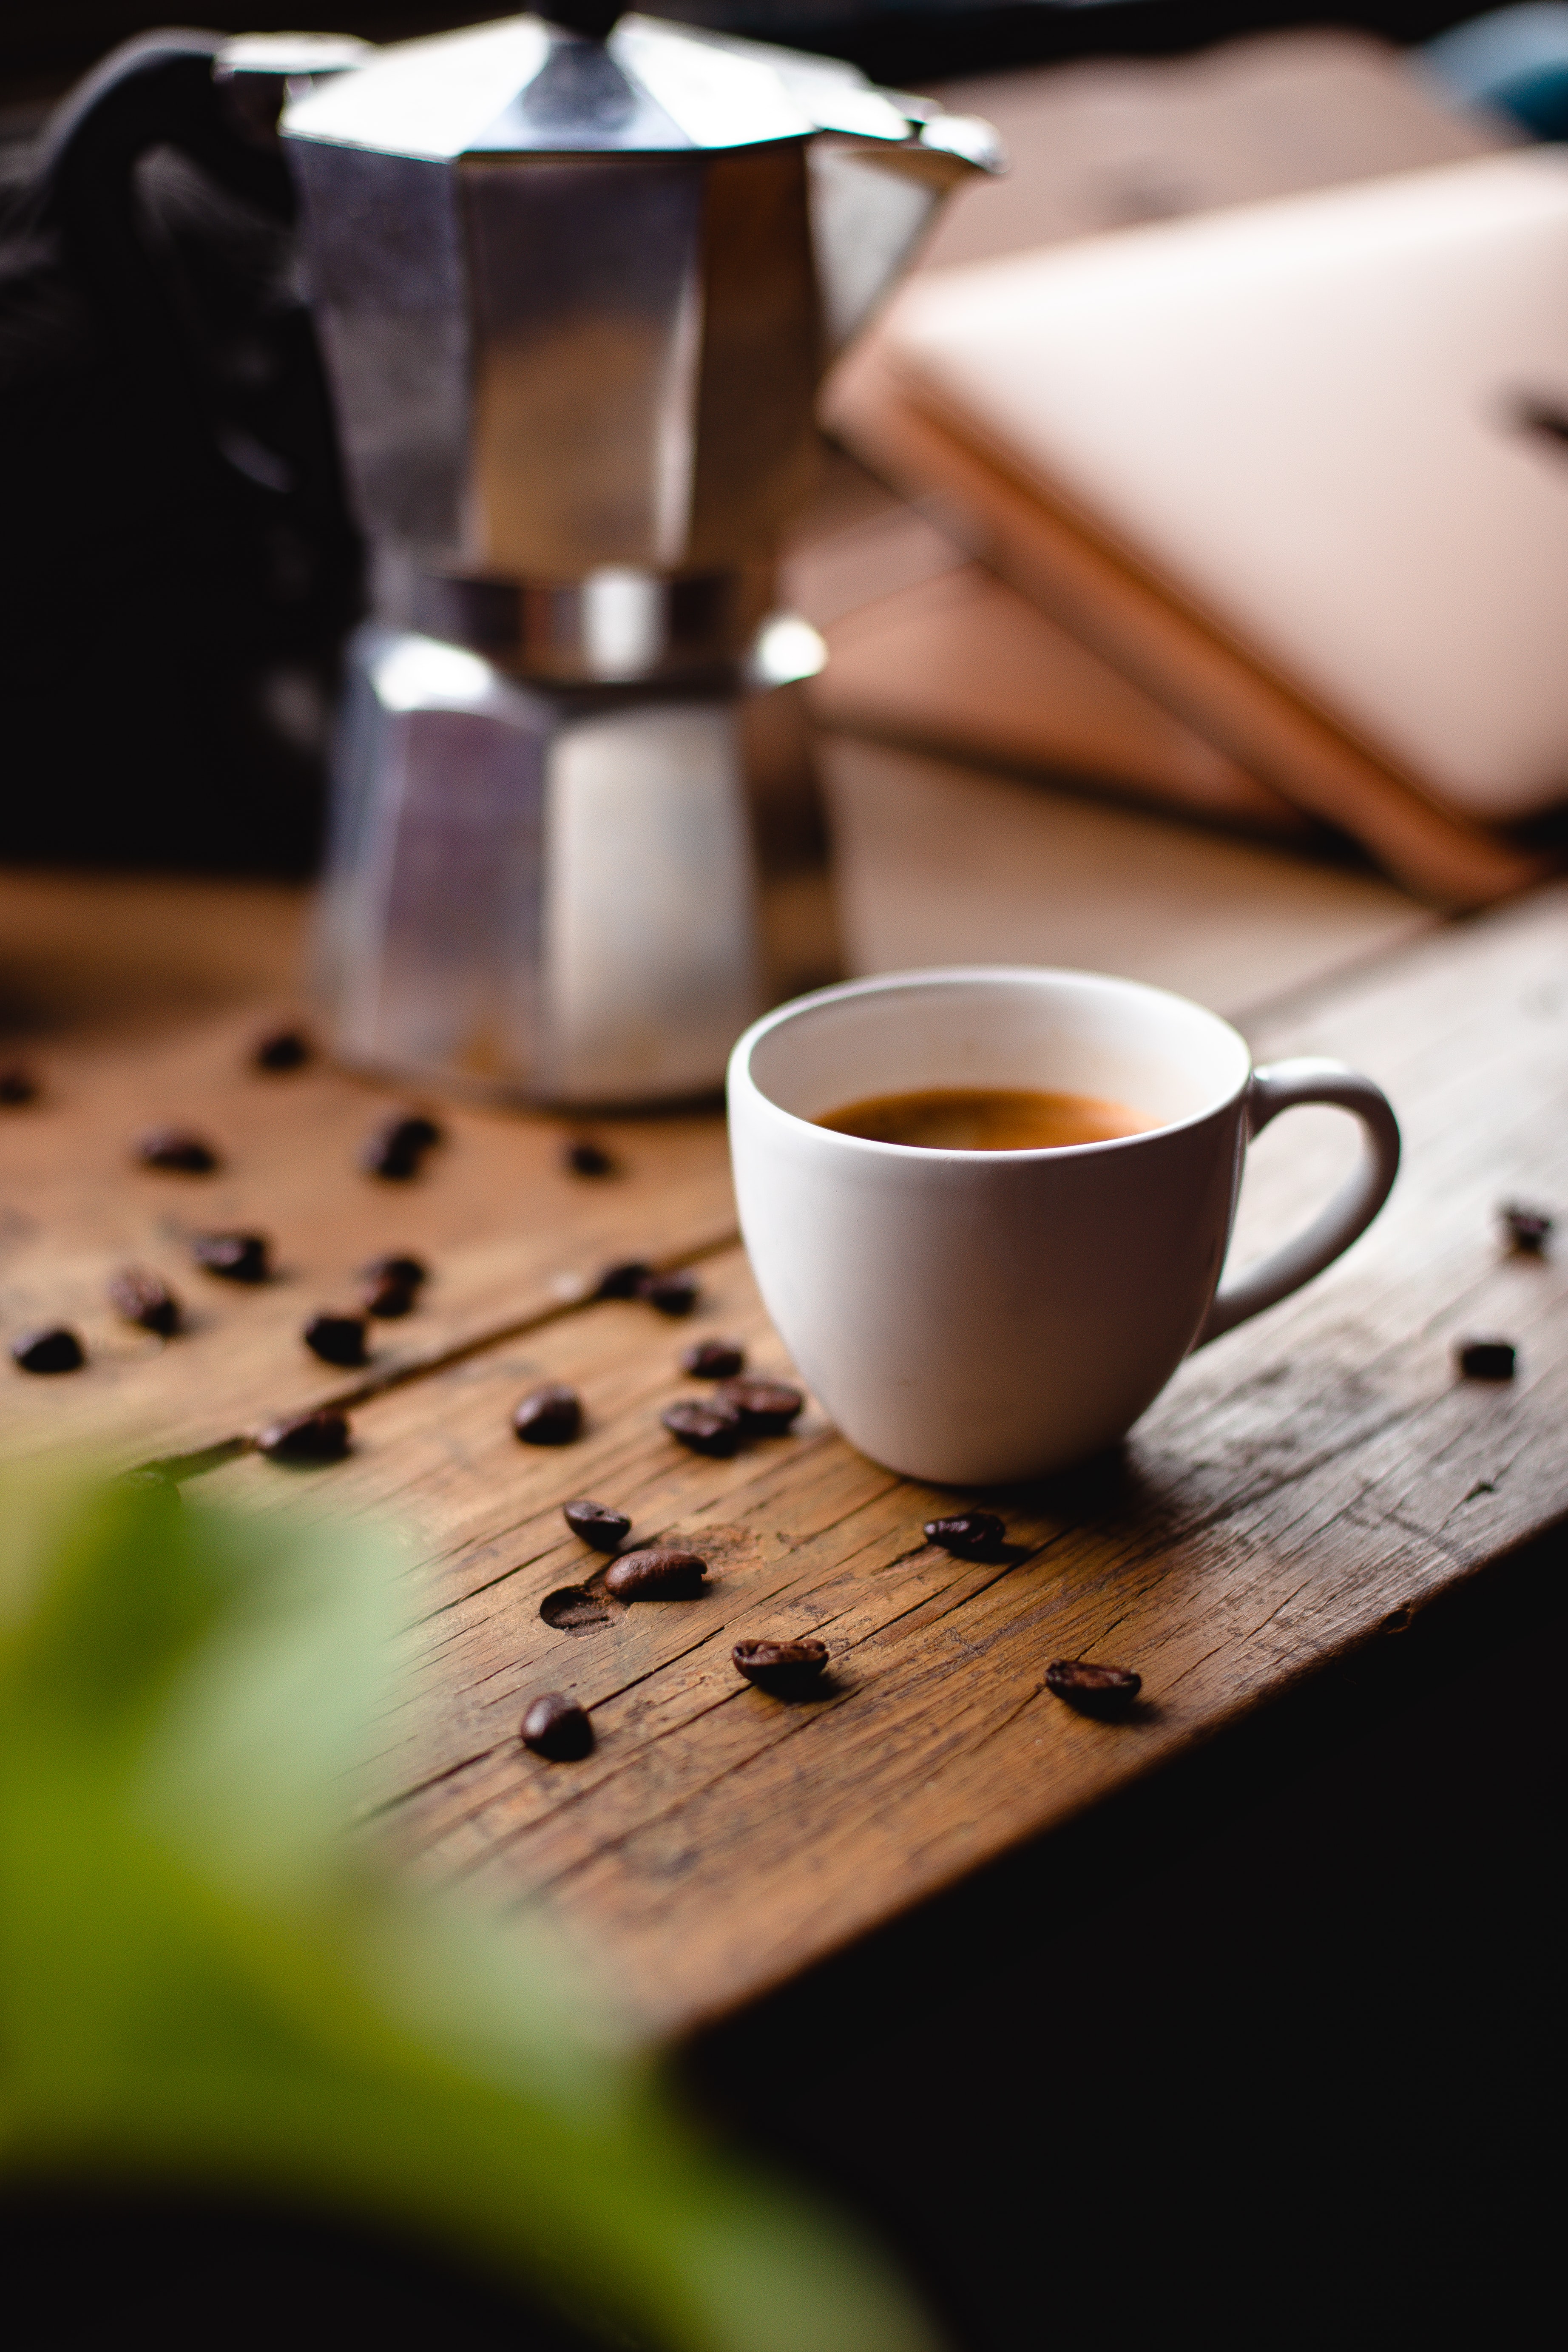 cup, coffee, teapot, food, table, kettle, coffee beans UHD